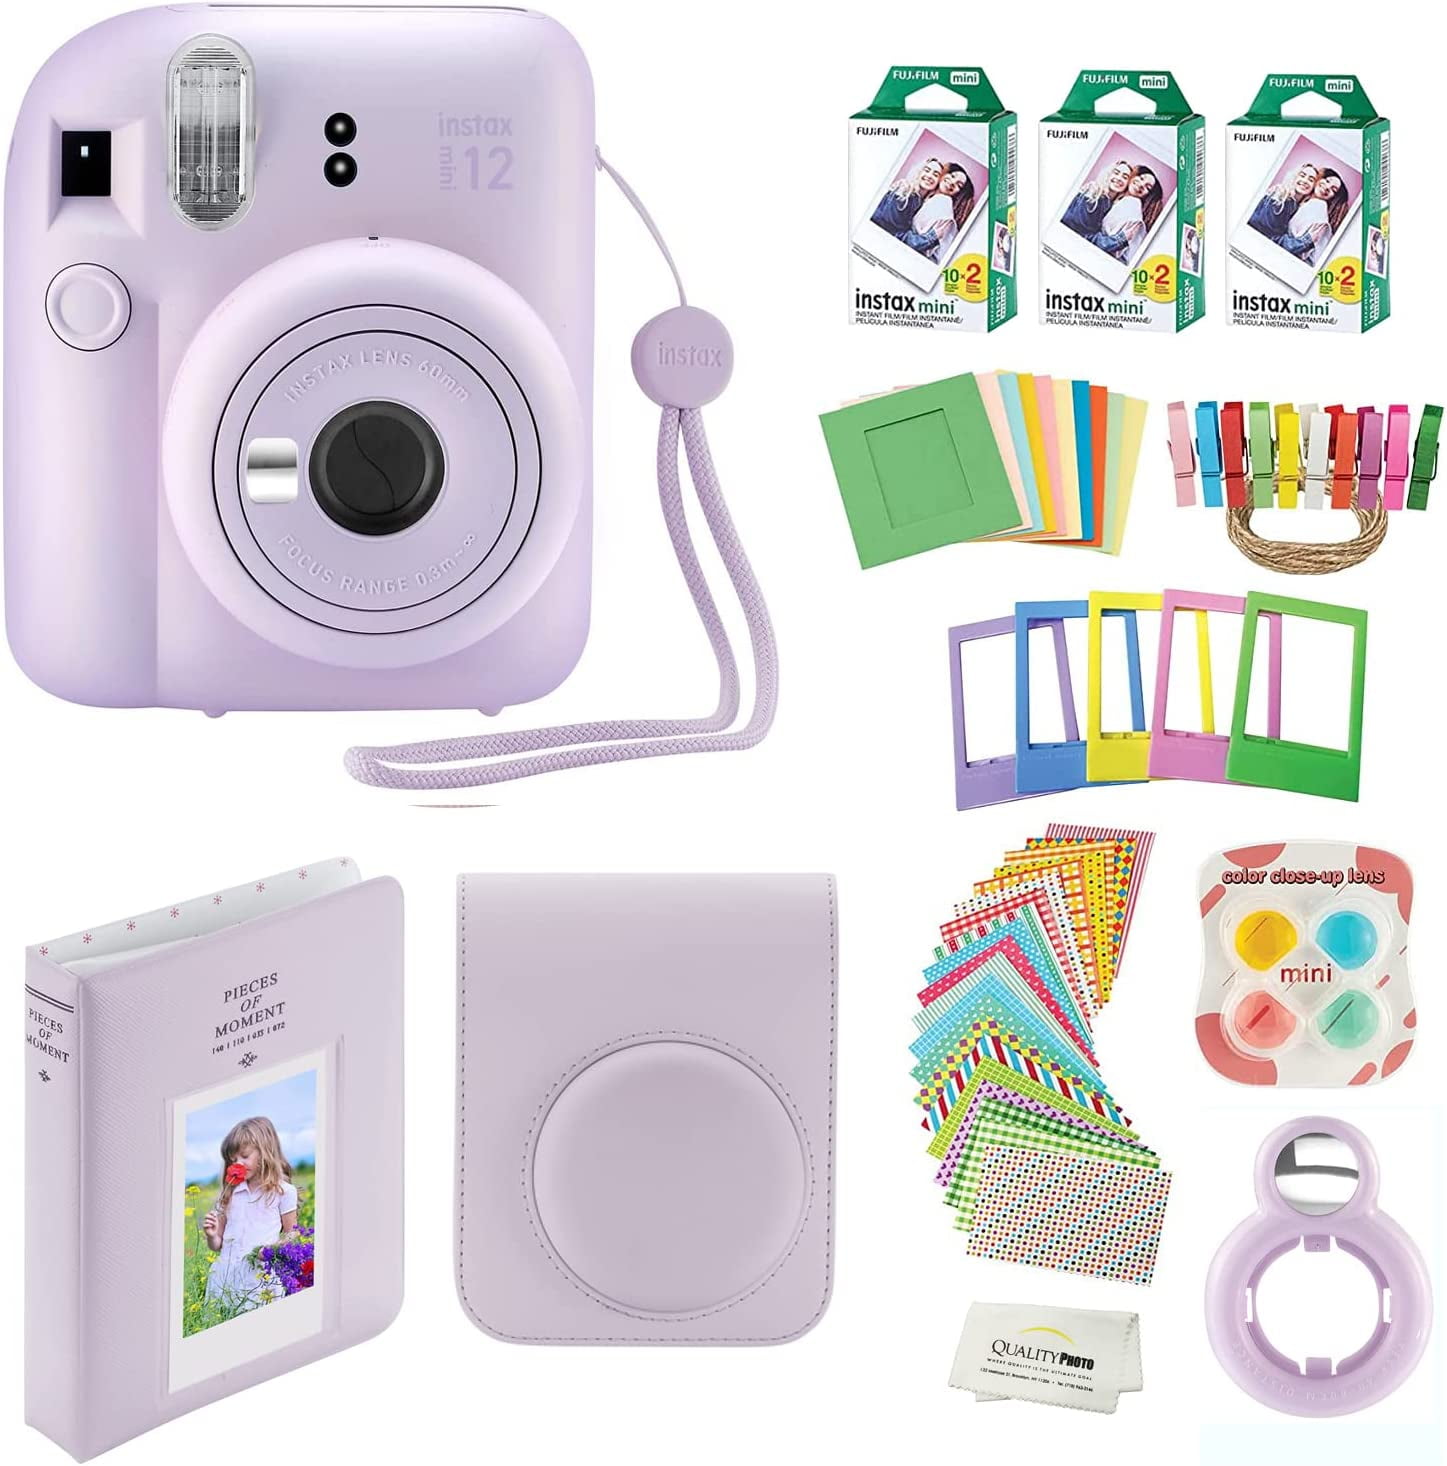 12 (Blush Stickers, Films, Photo 60 Instant More Mini Camera and Pink) Case, Fuji Accessory Instax Frames, kit with Fujifilm Decoration Album